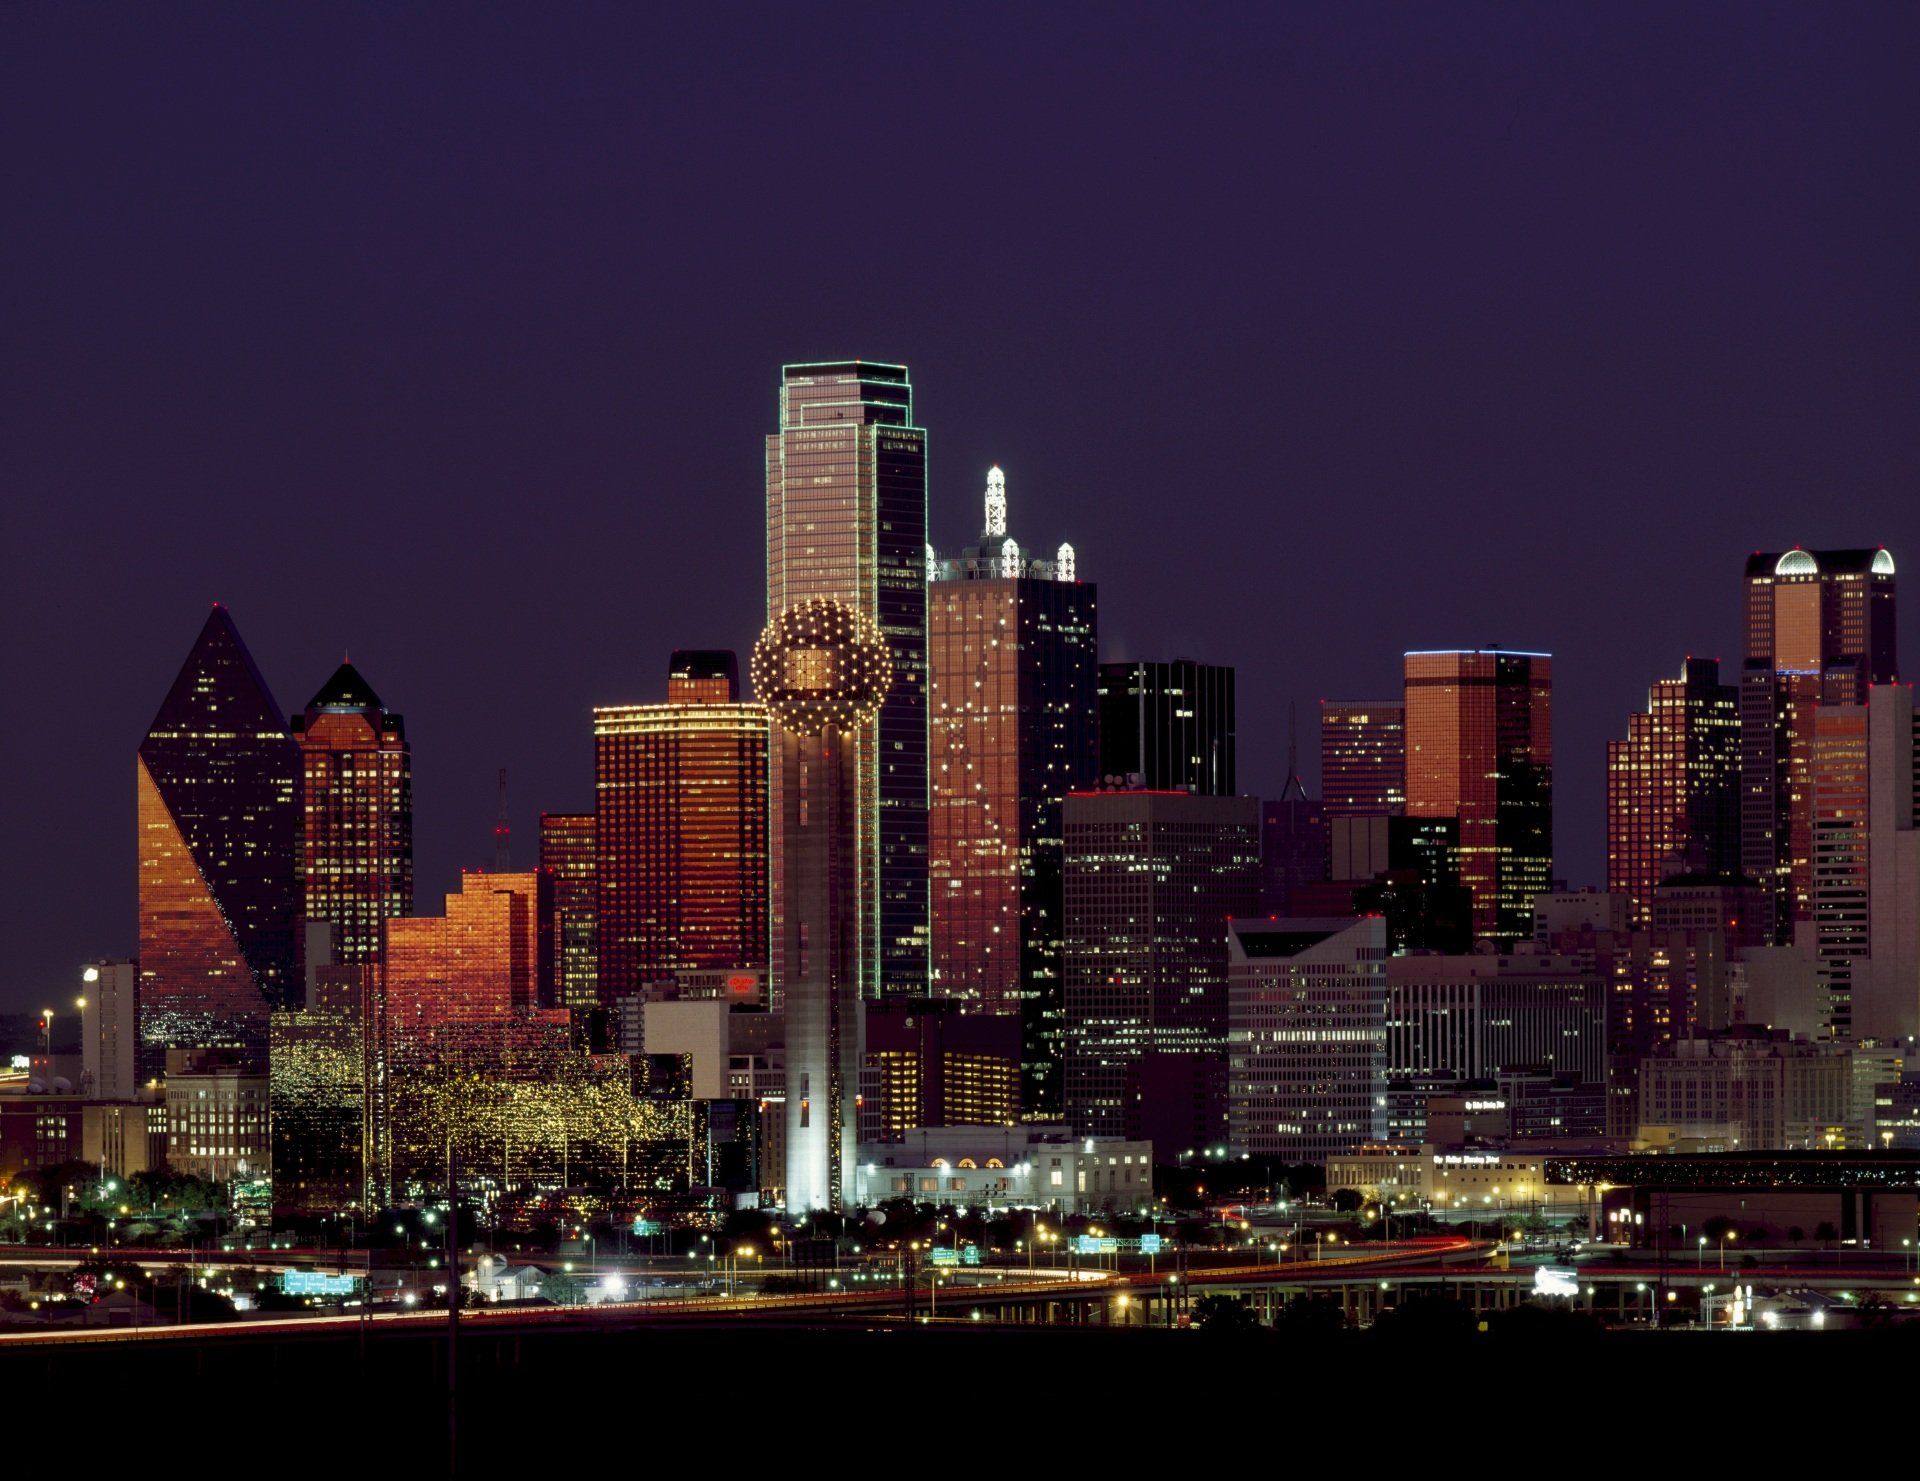 A city skyline at night with a purple sky in the background